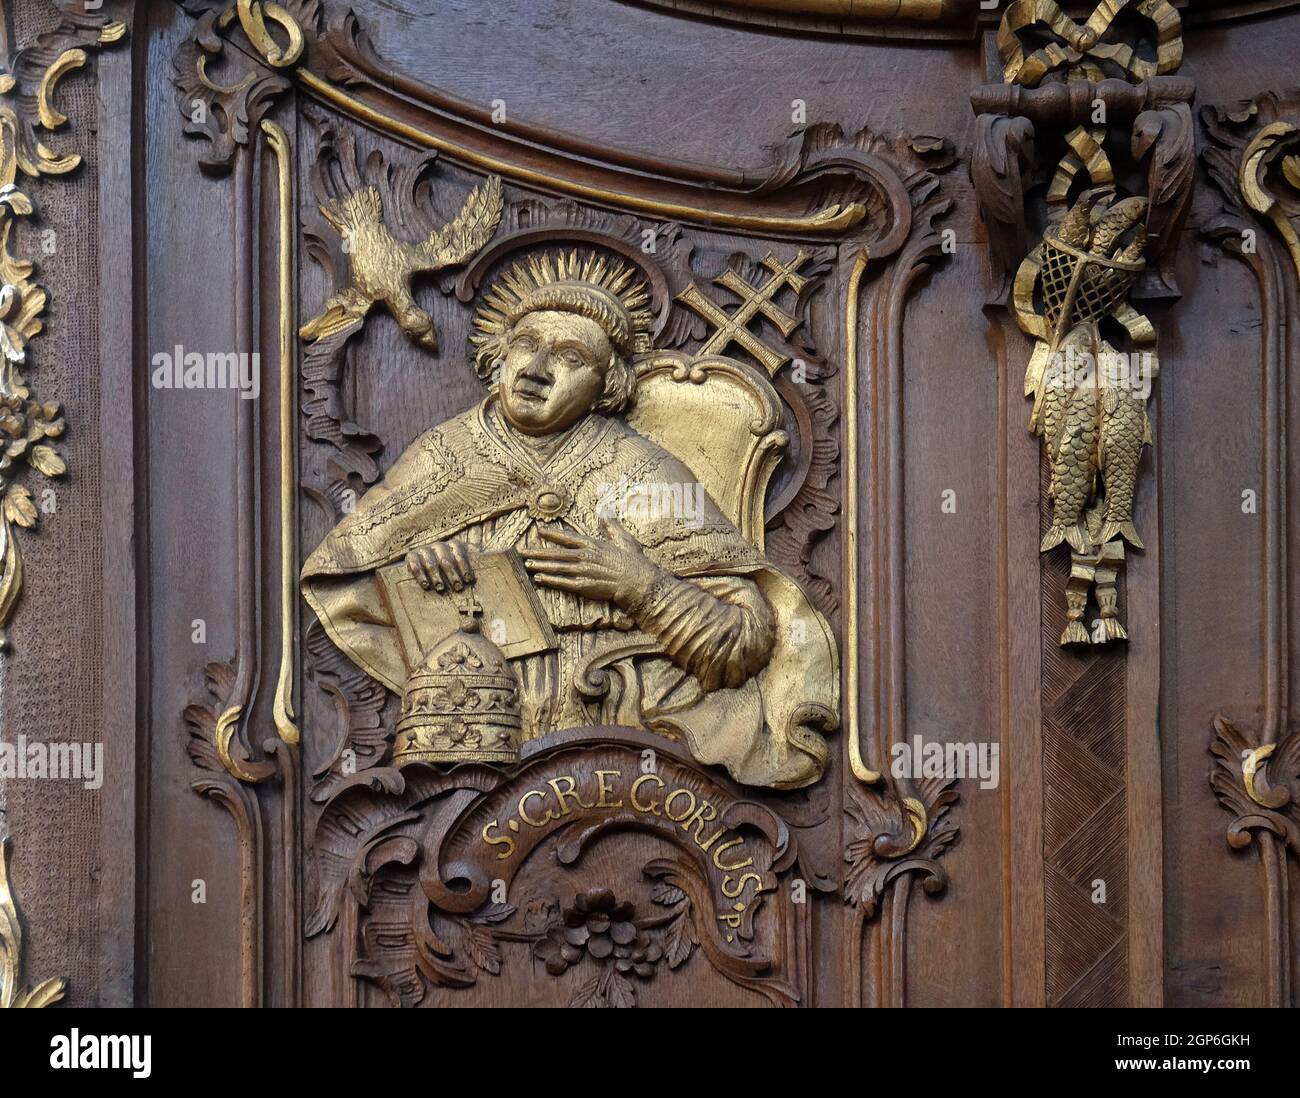 Saint Gregory the Great, one of the Latin Fathers of the Church, choir stalls by Daniel Aschauer in Cistercian Abbey of Bronbach in Reicholzheim near Stock Photo